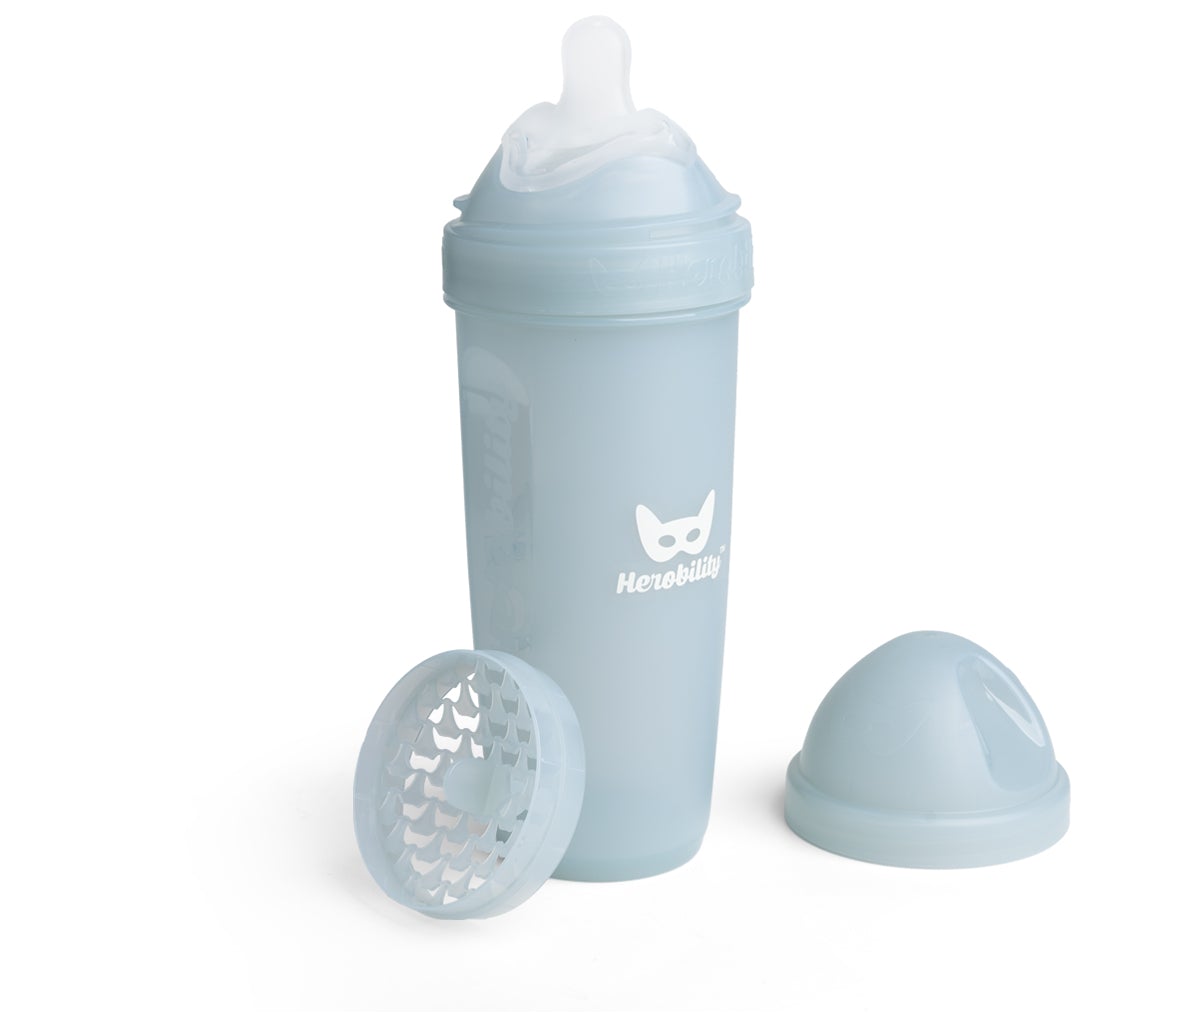 4-pack 340ml/12 floz Baby Bottles with 30% discount